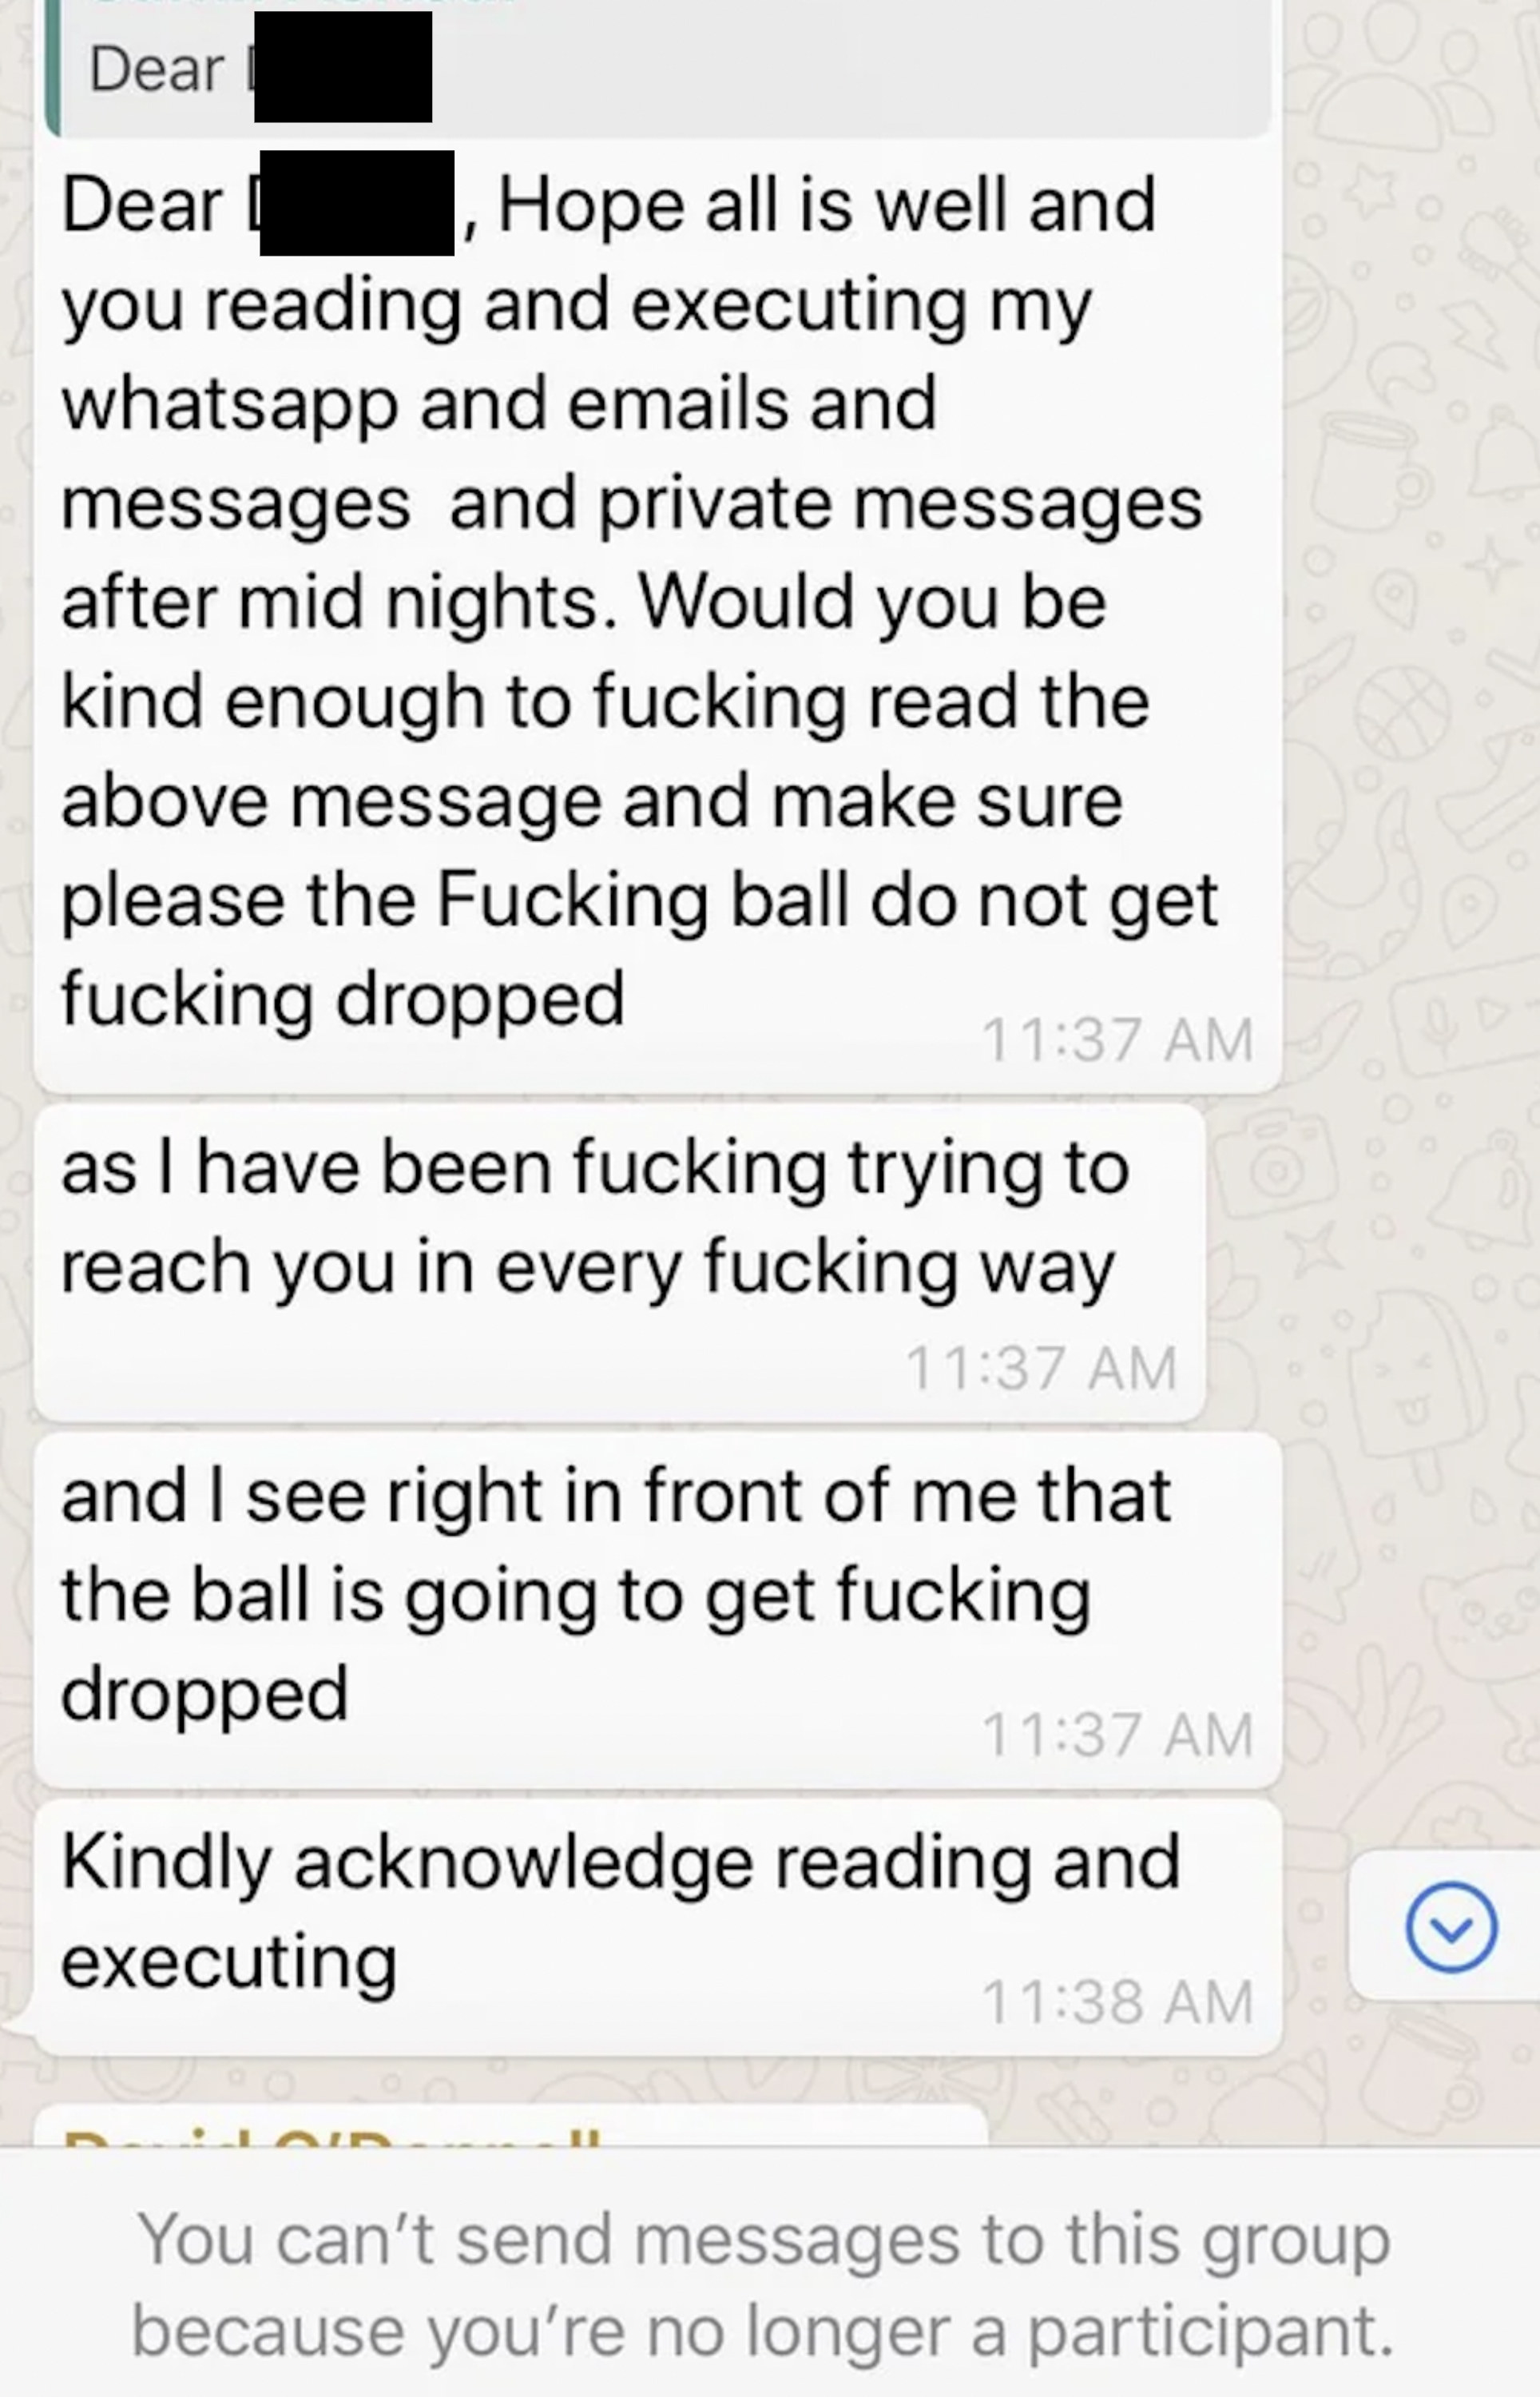 A string of abusive message from a boss in a WhatsApp thread group